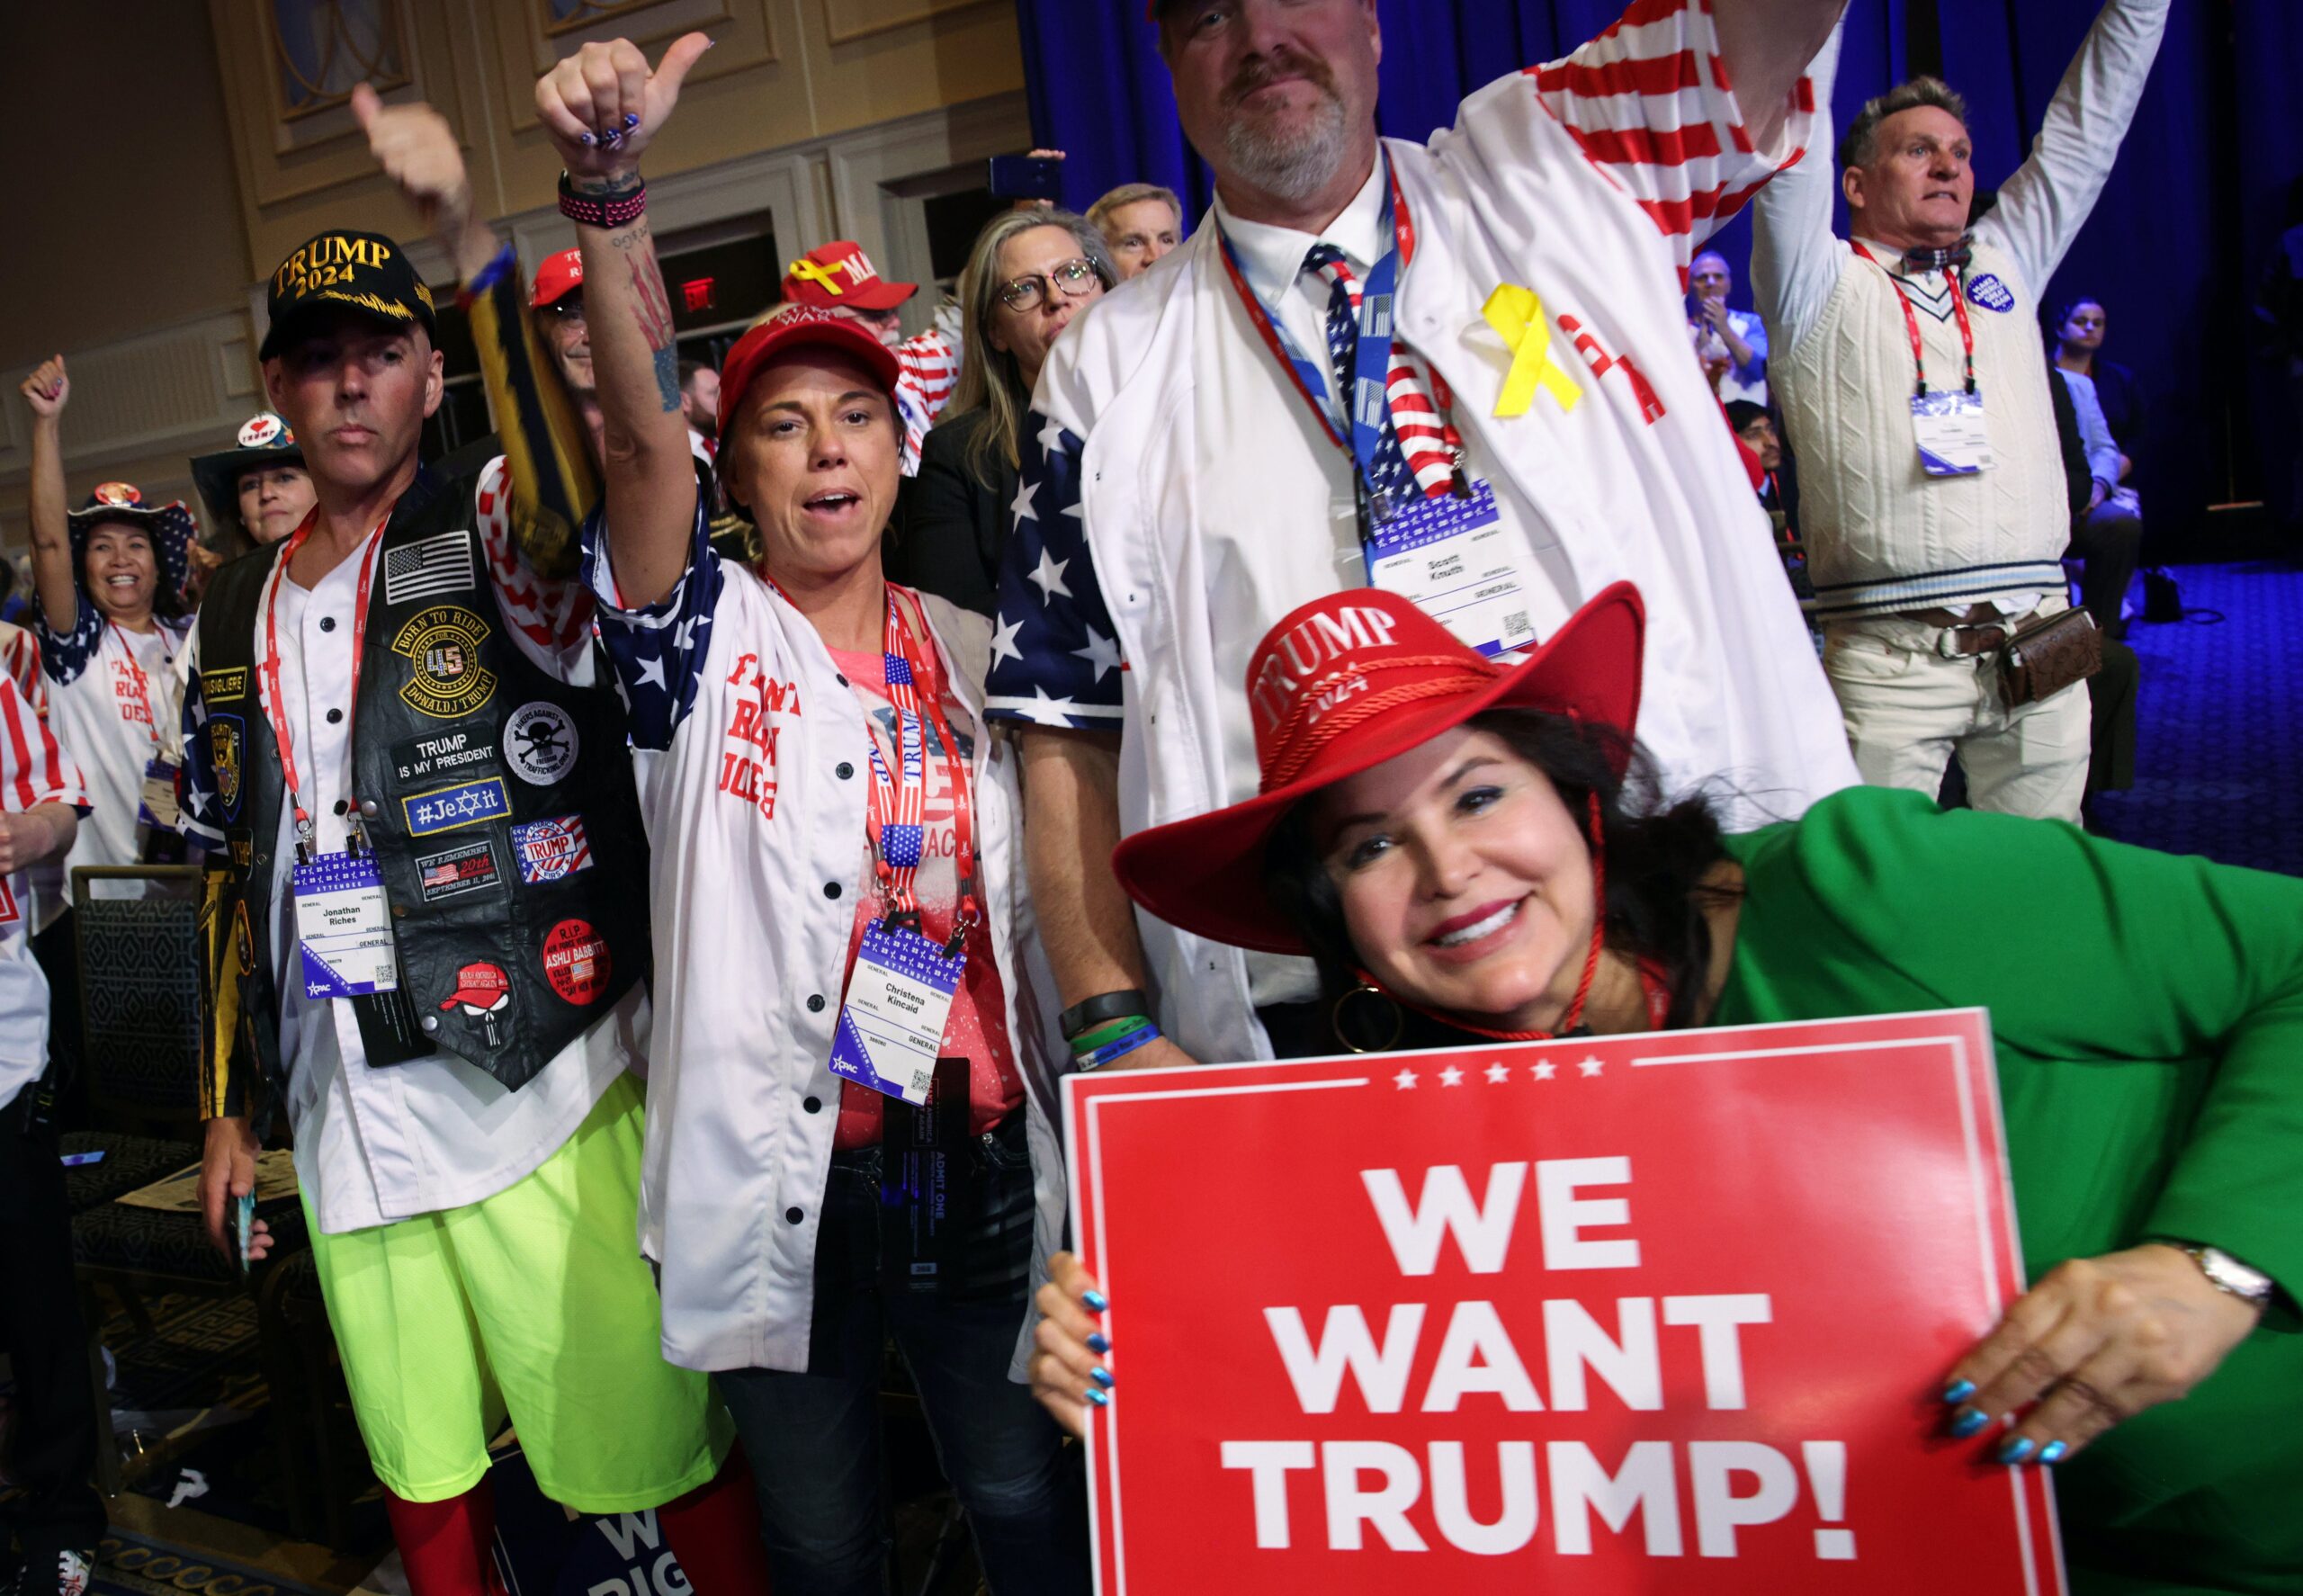 I went to CPAC to take MAGA supporters’ pulse – China and transgender people are among the top ‘demons’ they say are ruining the country